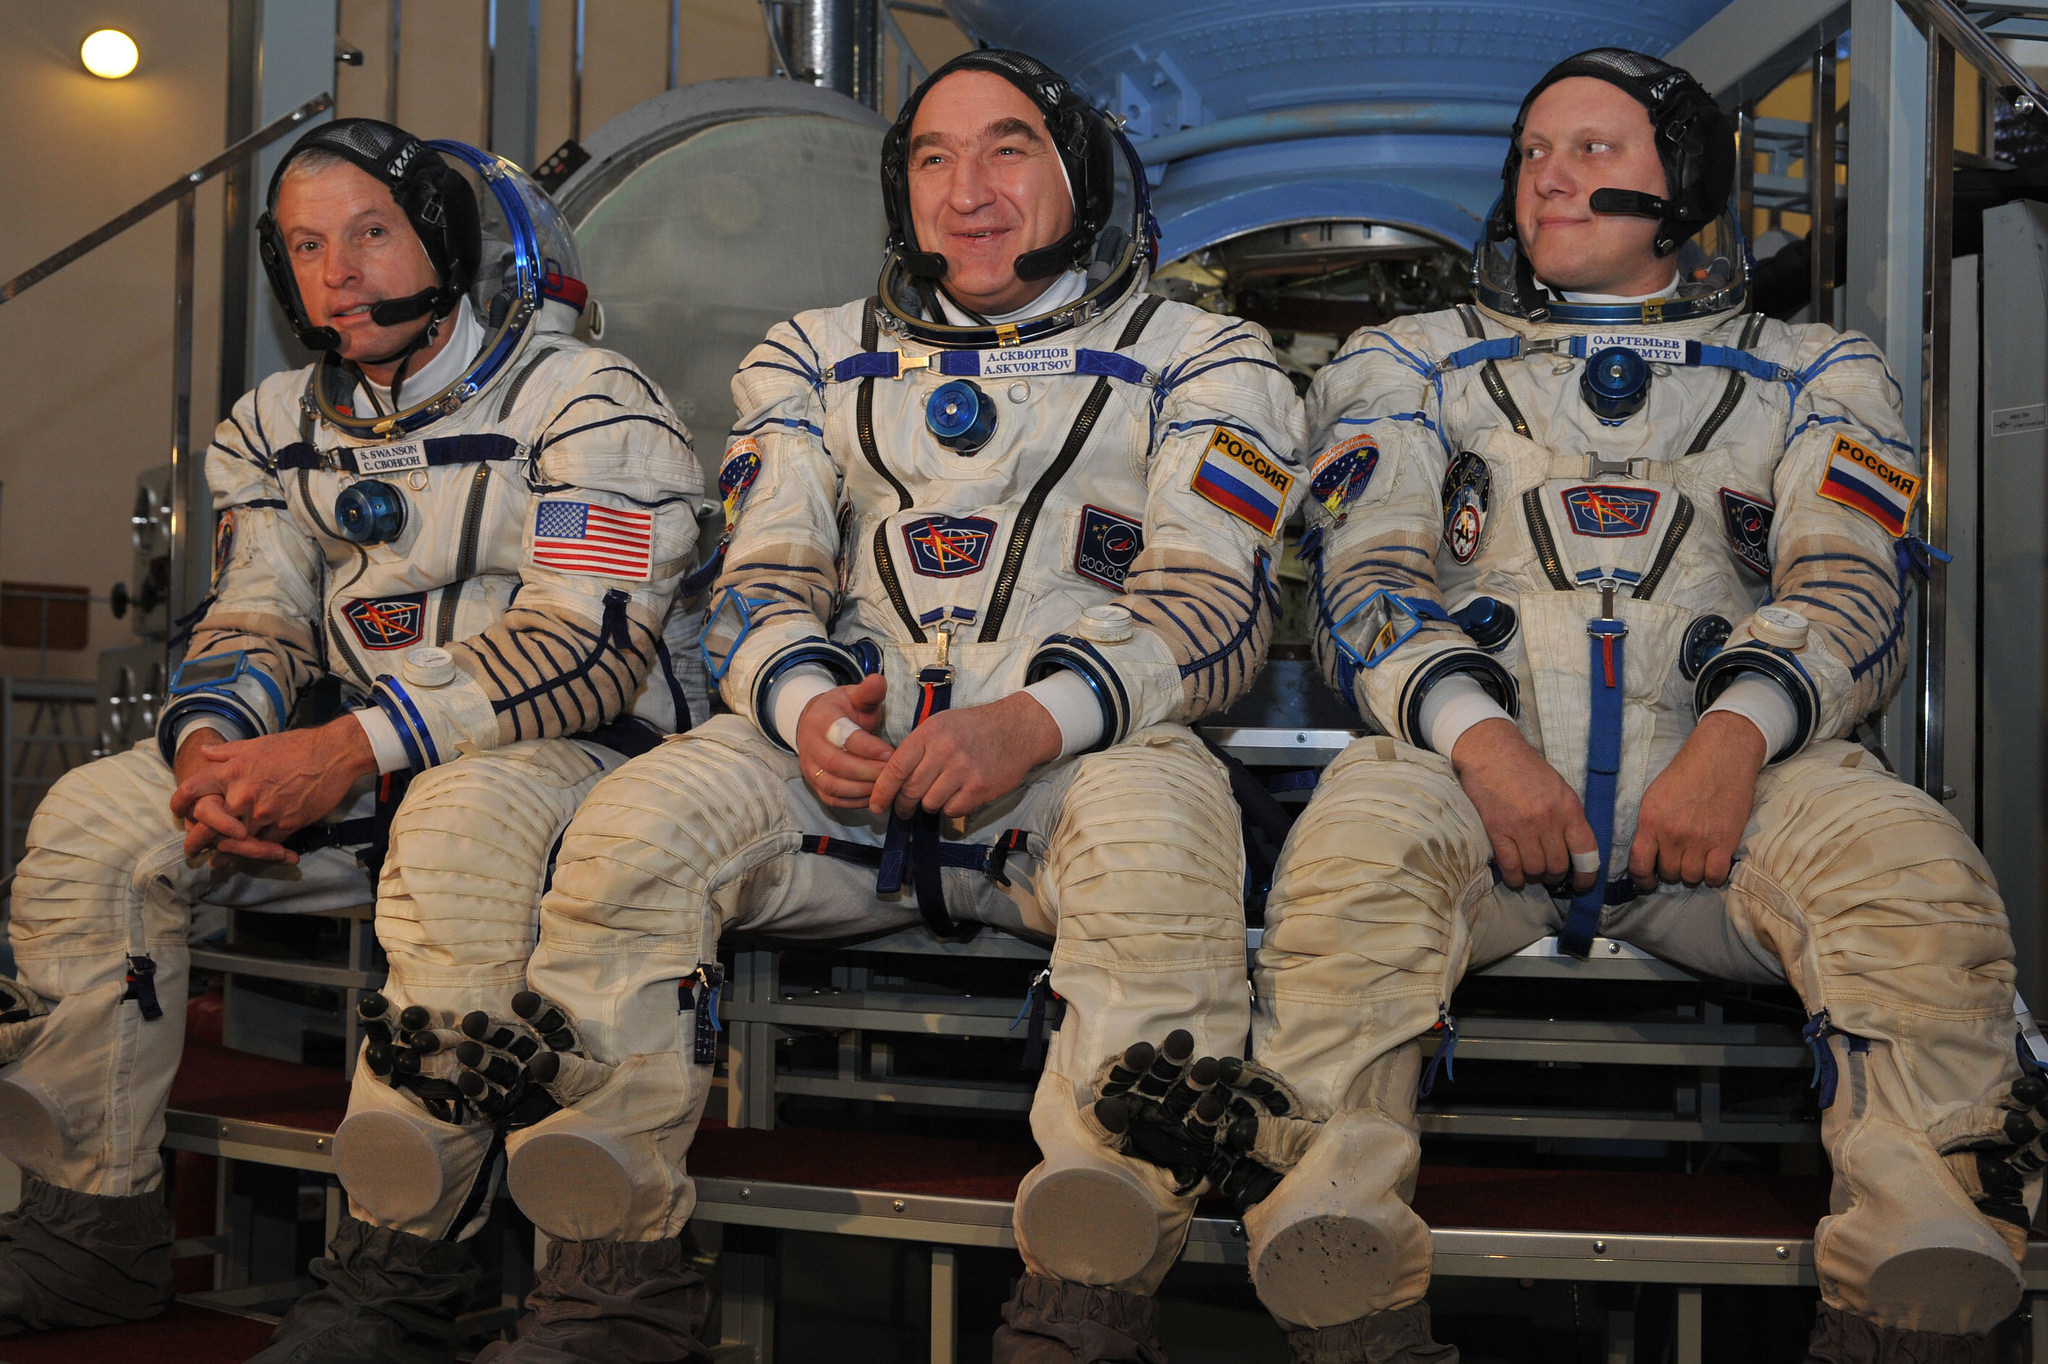 Pictured in their Sokol ("Falcon") launch and entry suits, in front of the Soyuz simulator, at the start of final exams on 5 March 2014, the Soyuz TMA-12M crew fields questions from journalists. Left to right are Steve Swanson, Aleksandr Skvortsov and Oleg Artemyev. Photo Credit: NASA